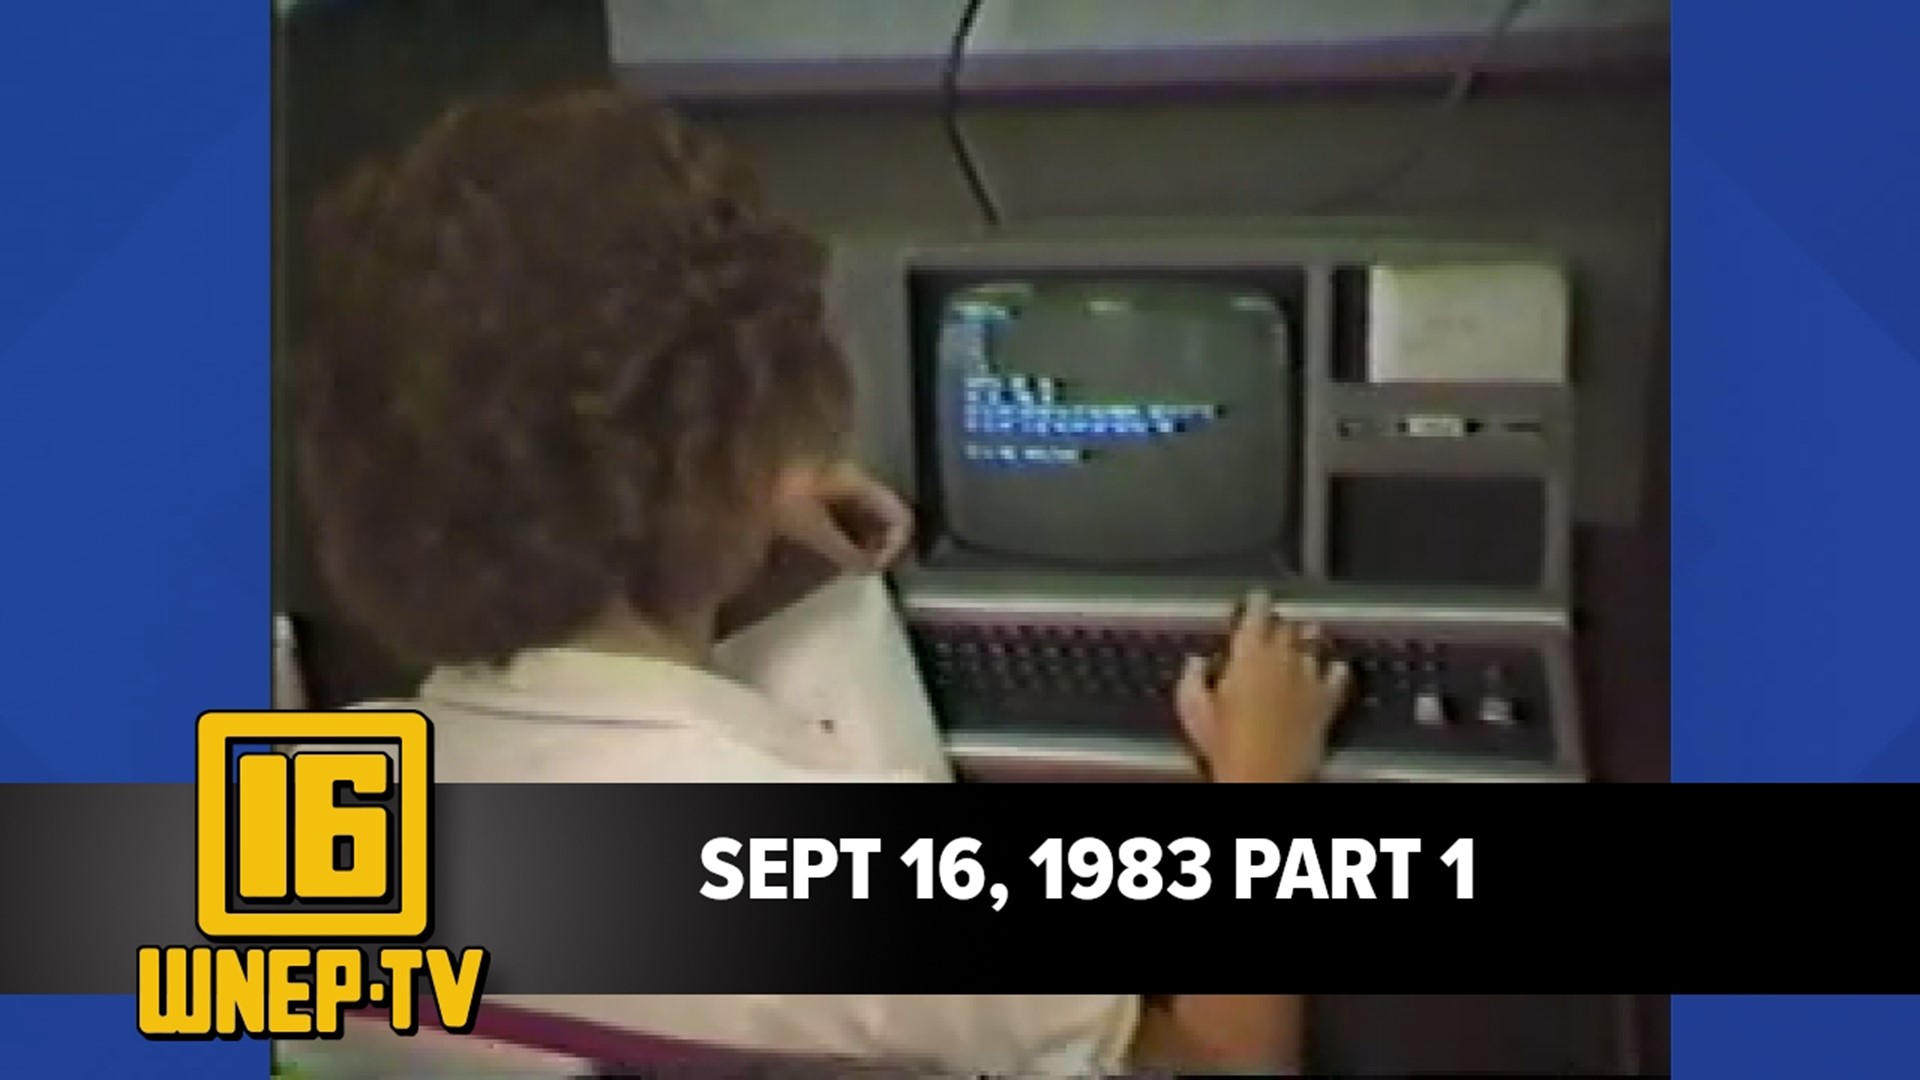 Join Karen Harch for curated stories from September 16, 1983.